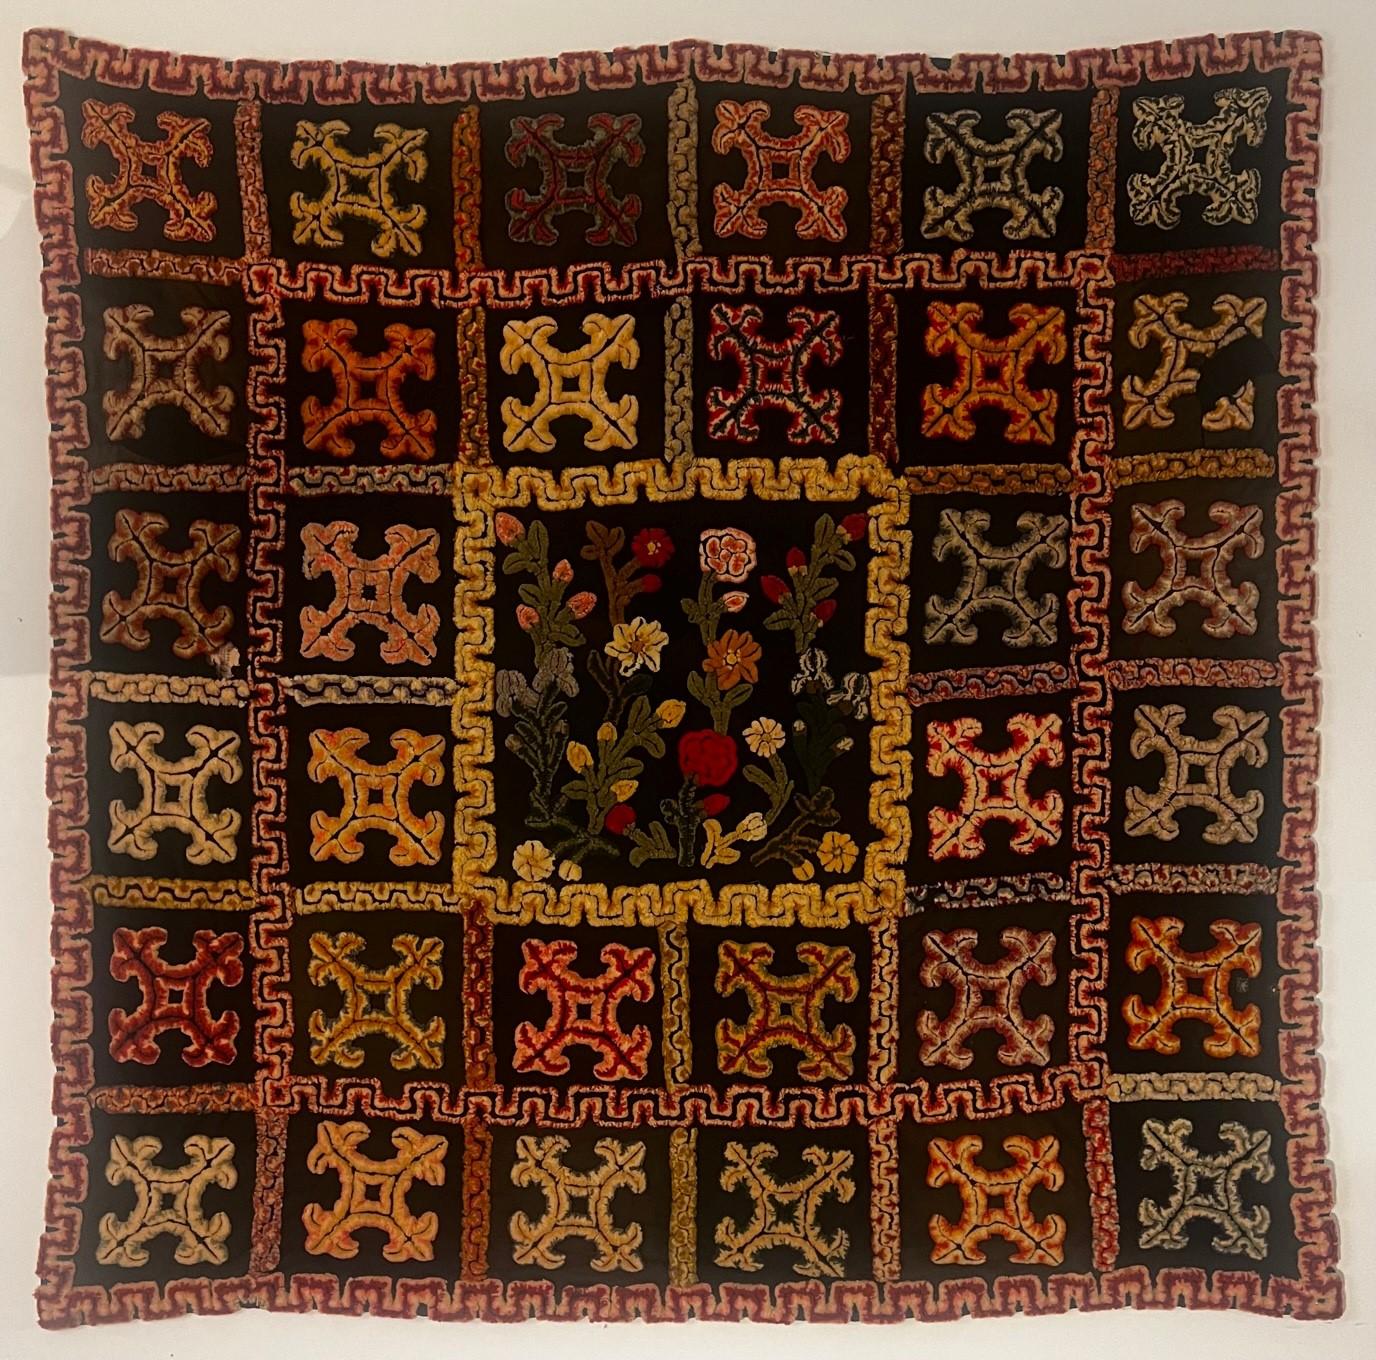 This rare and outstanding French antique Royal Quilt with flower design and each square consisting of four Fleur-de-lis originally was used for ceremonial Royal weddings at the Roman Catholic Churches. The borders of the Quilt represent the typical